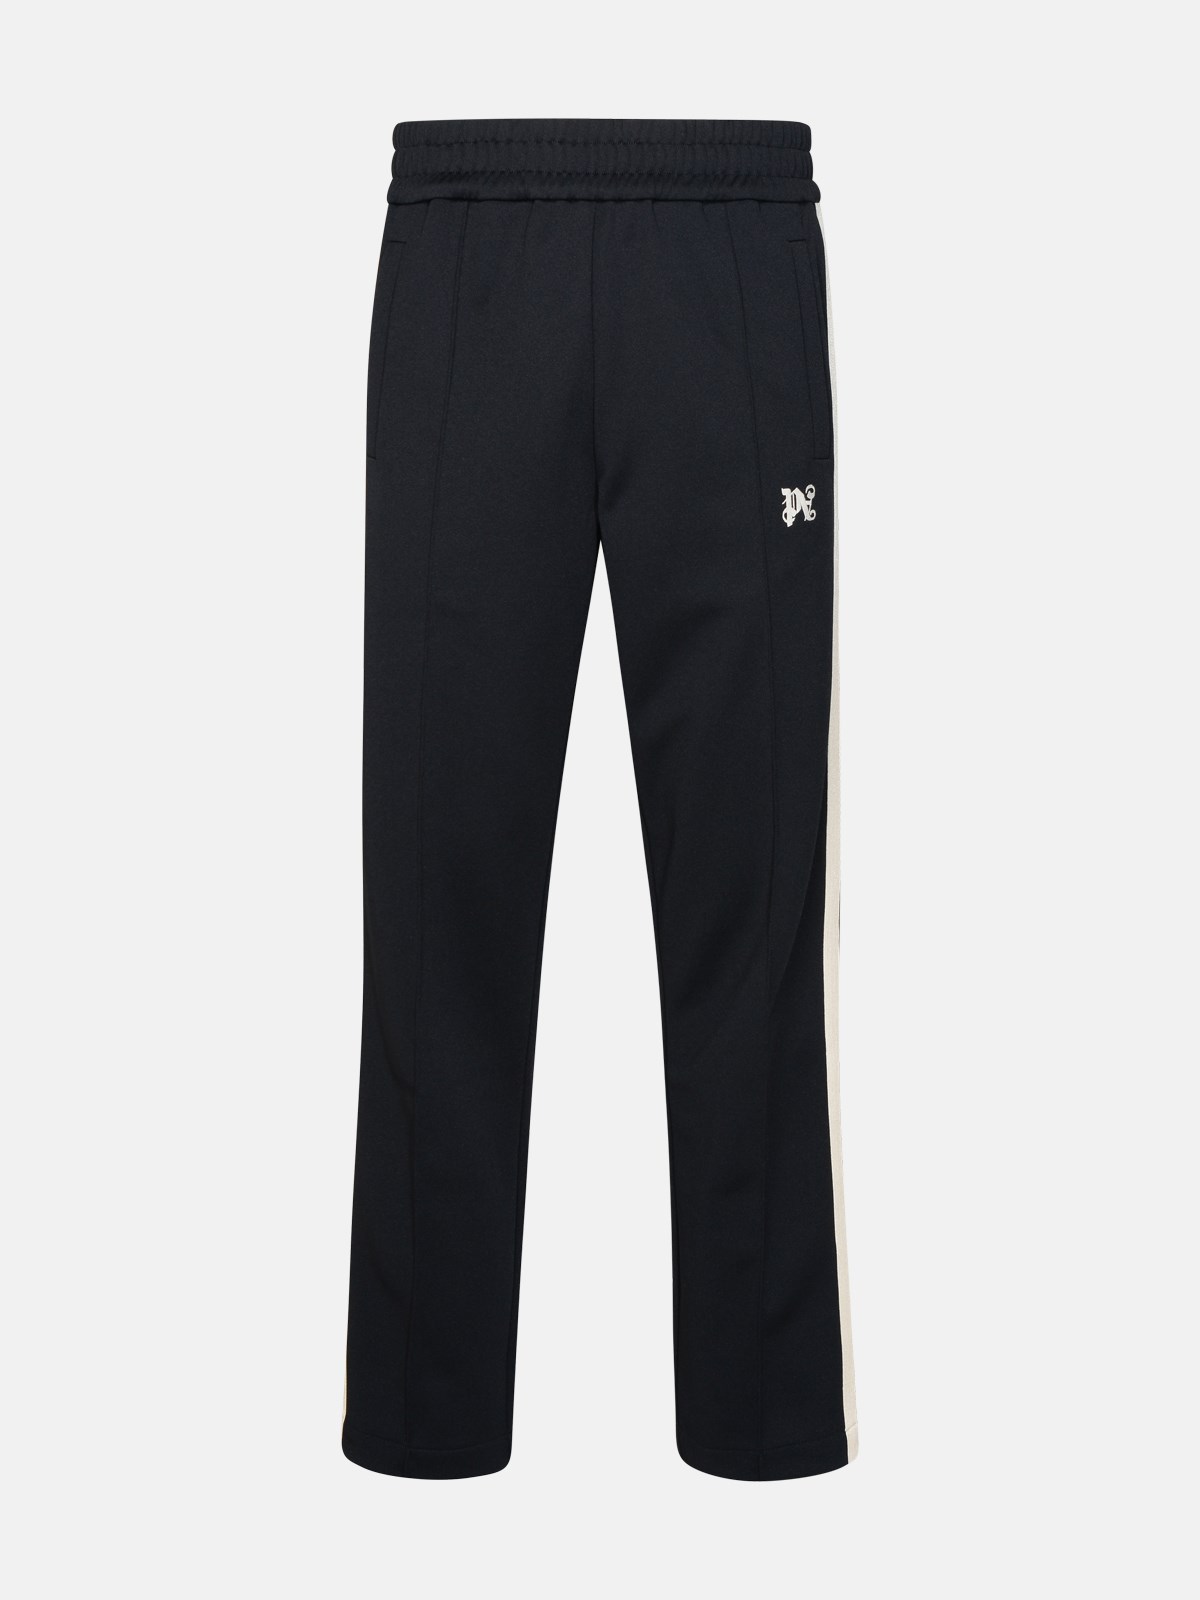 Palm Angels Black Polyester Track Pants